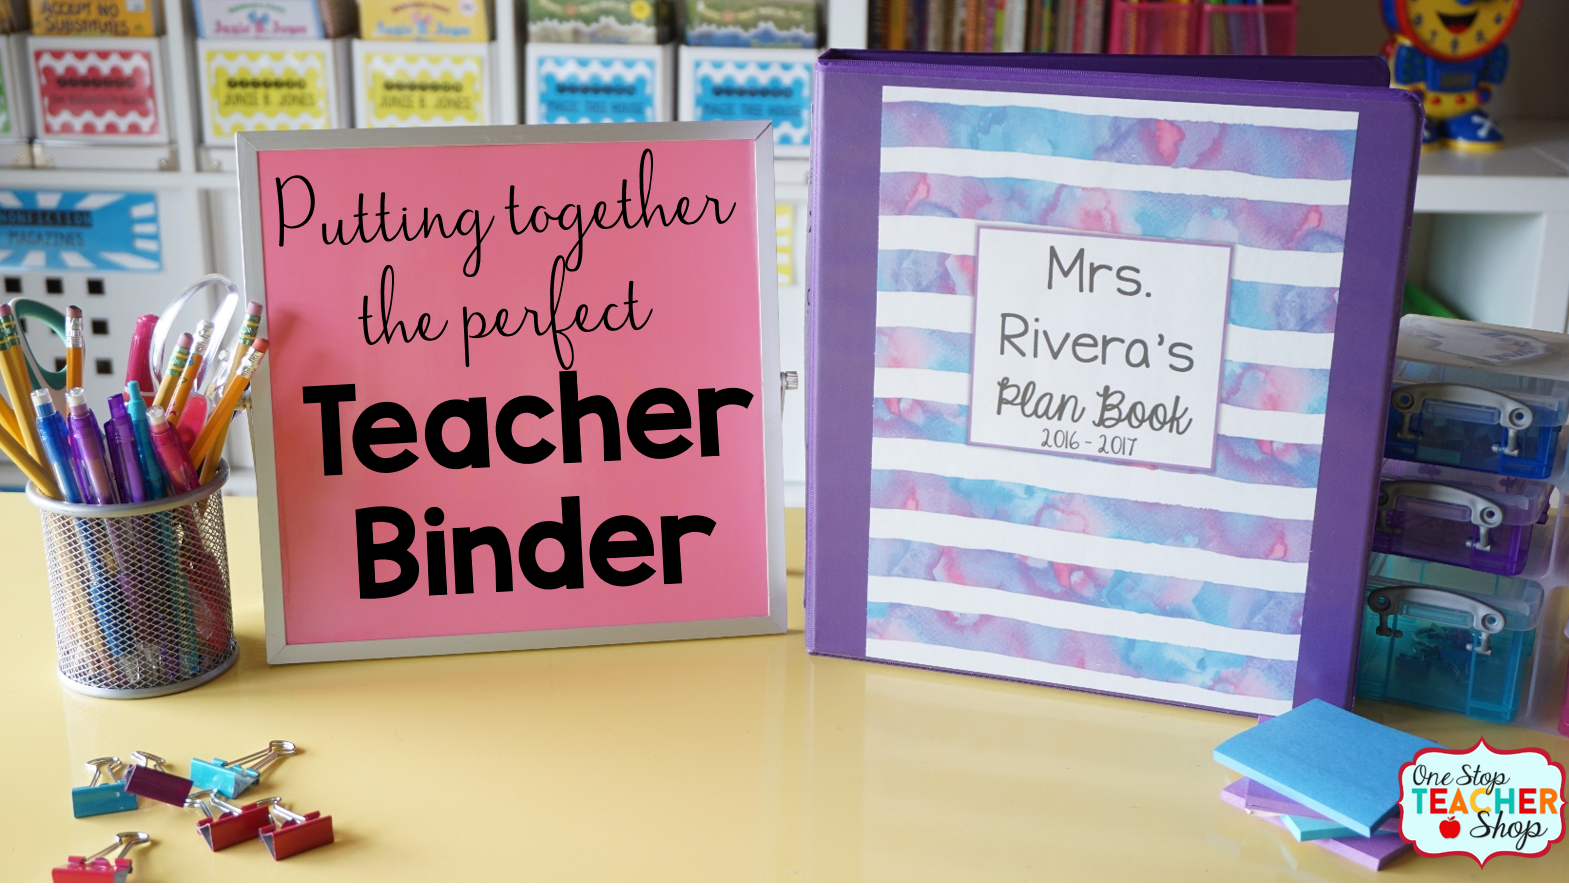 Classroom organization is important! My teacher binder helps me stay organized all year. Here are some of my favorite tips and ideas for putting together the best teacher binder. (I can't live without #5)